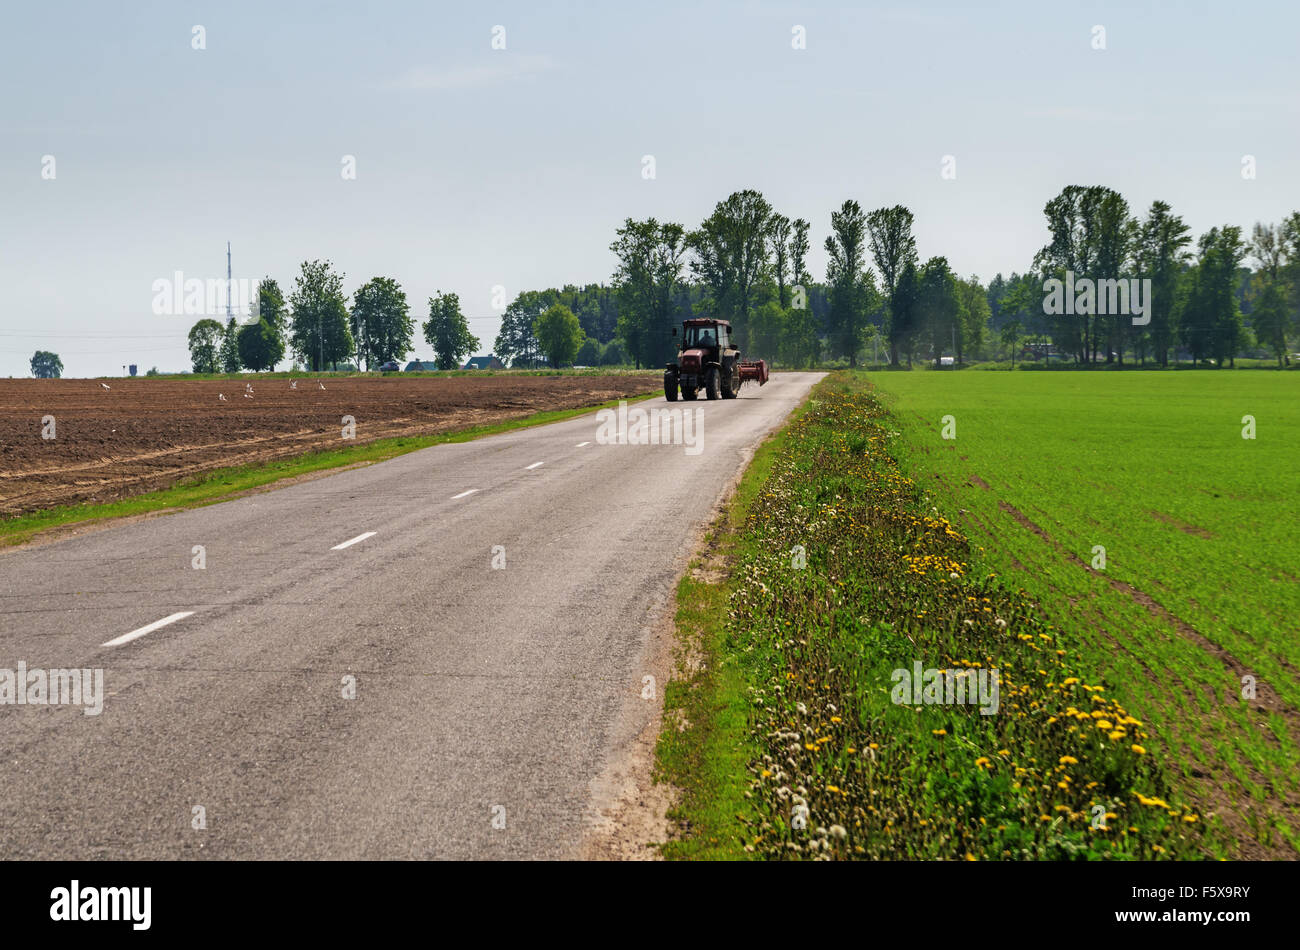 The tractor works at an agricultural field. Stock Photo